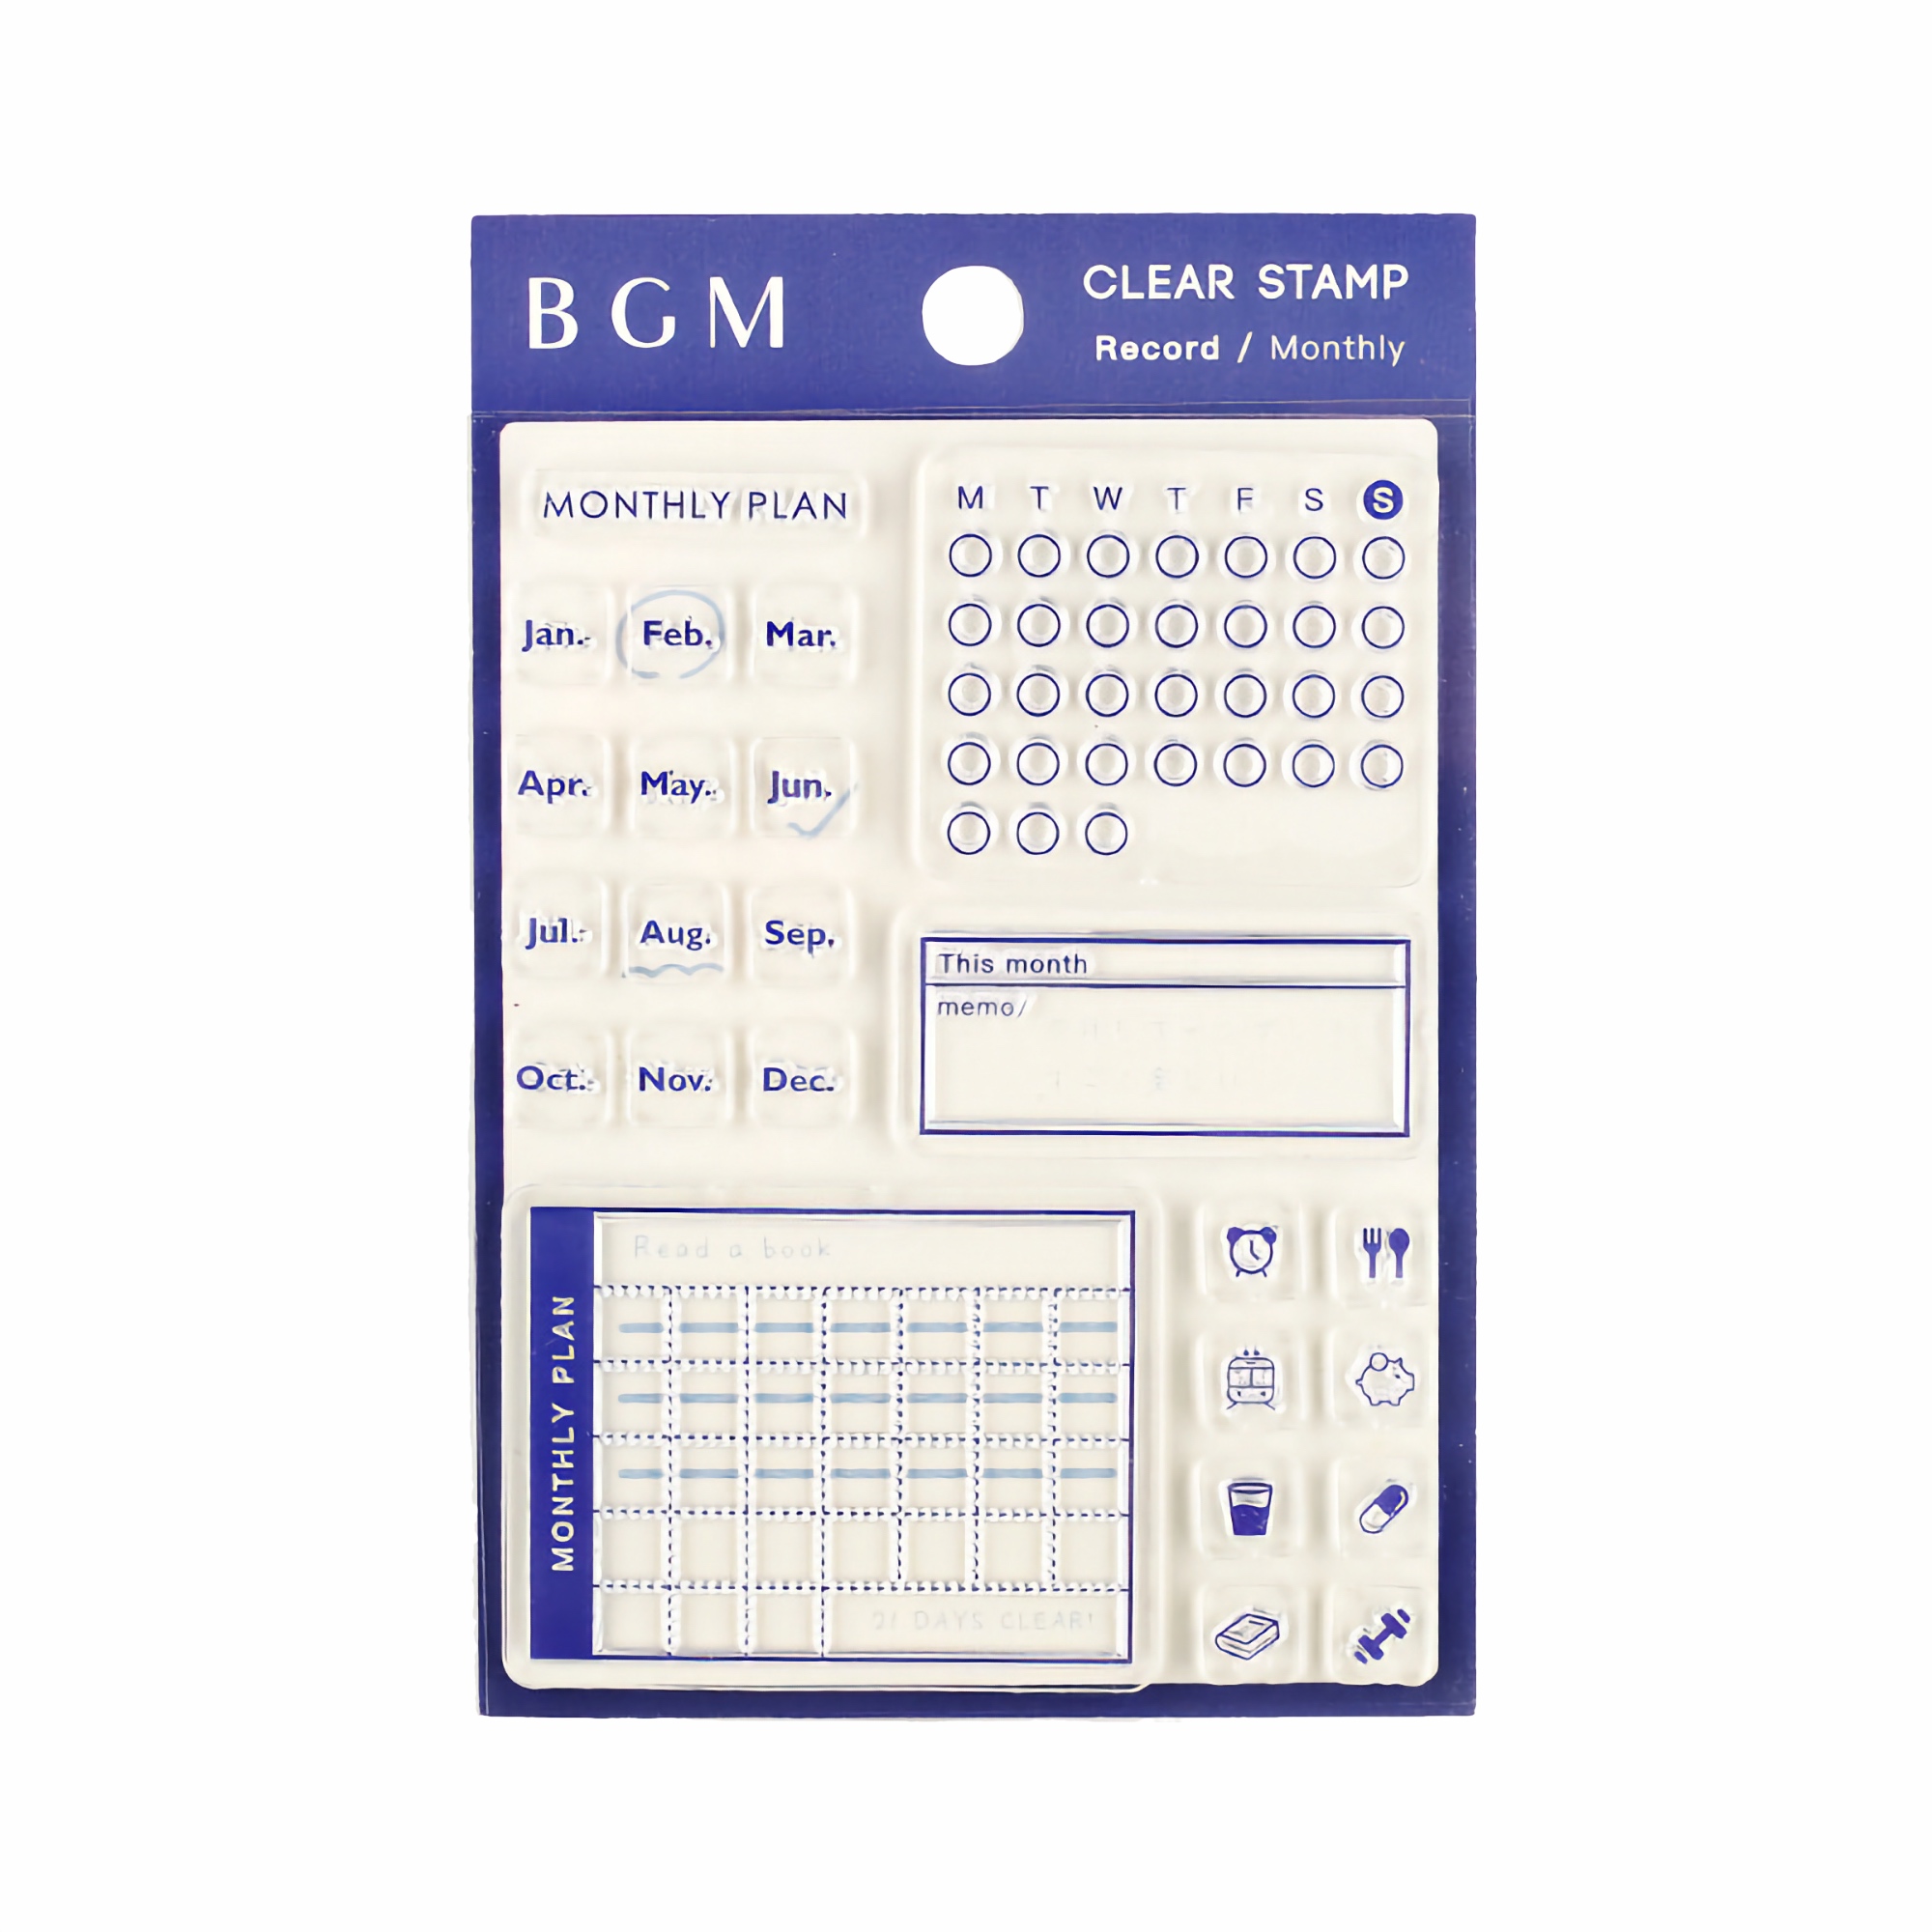 BGM Clear Stamp Record Monthly